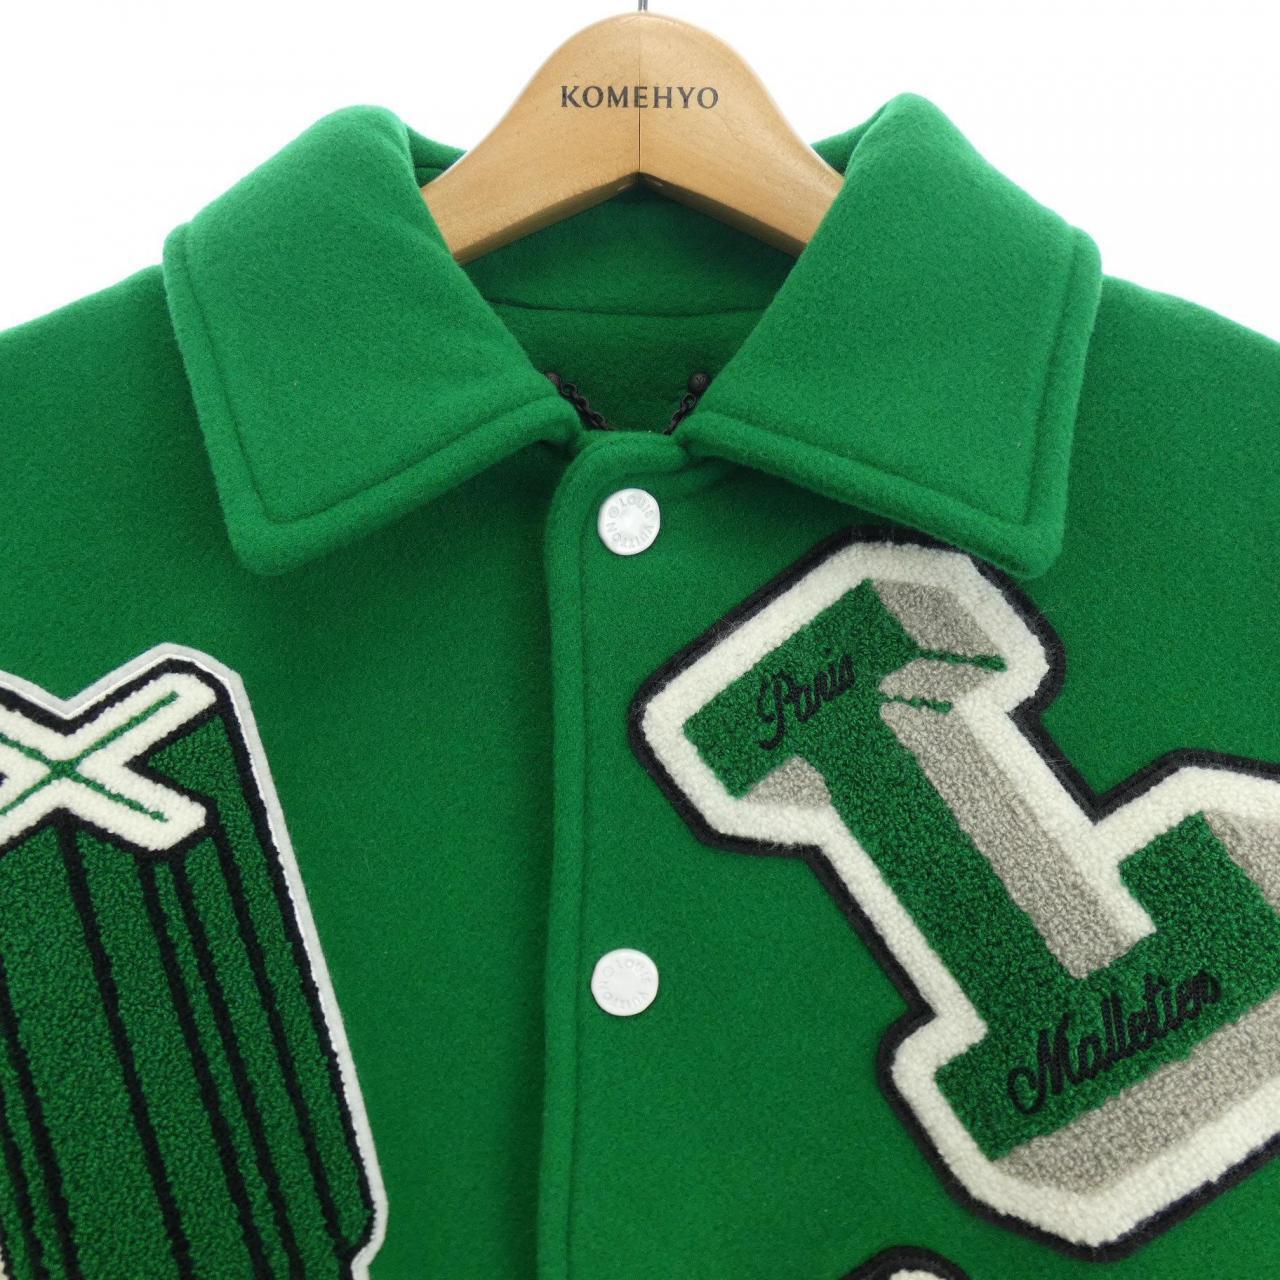 LV Louis Vuitton JAPAN ONLY Red Hunting Club Varsity Letterman Jacket for  Sale in Houston, TX - OfferUp